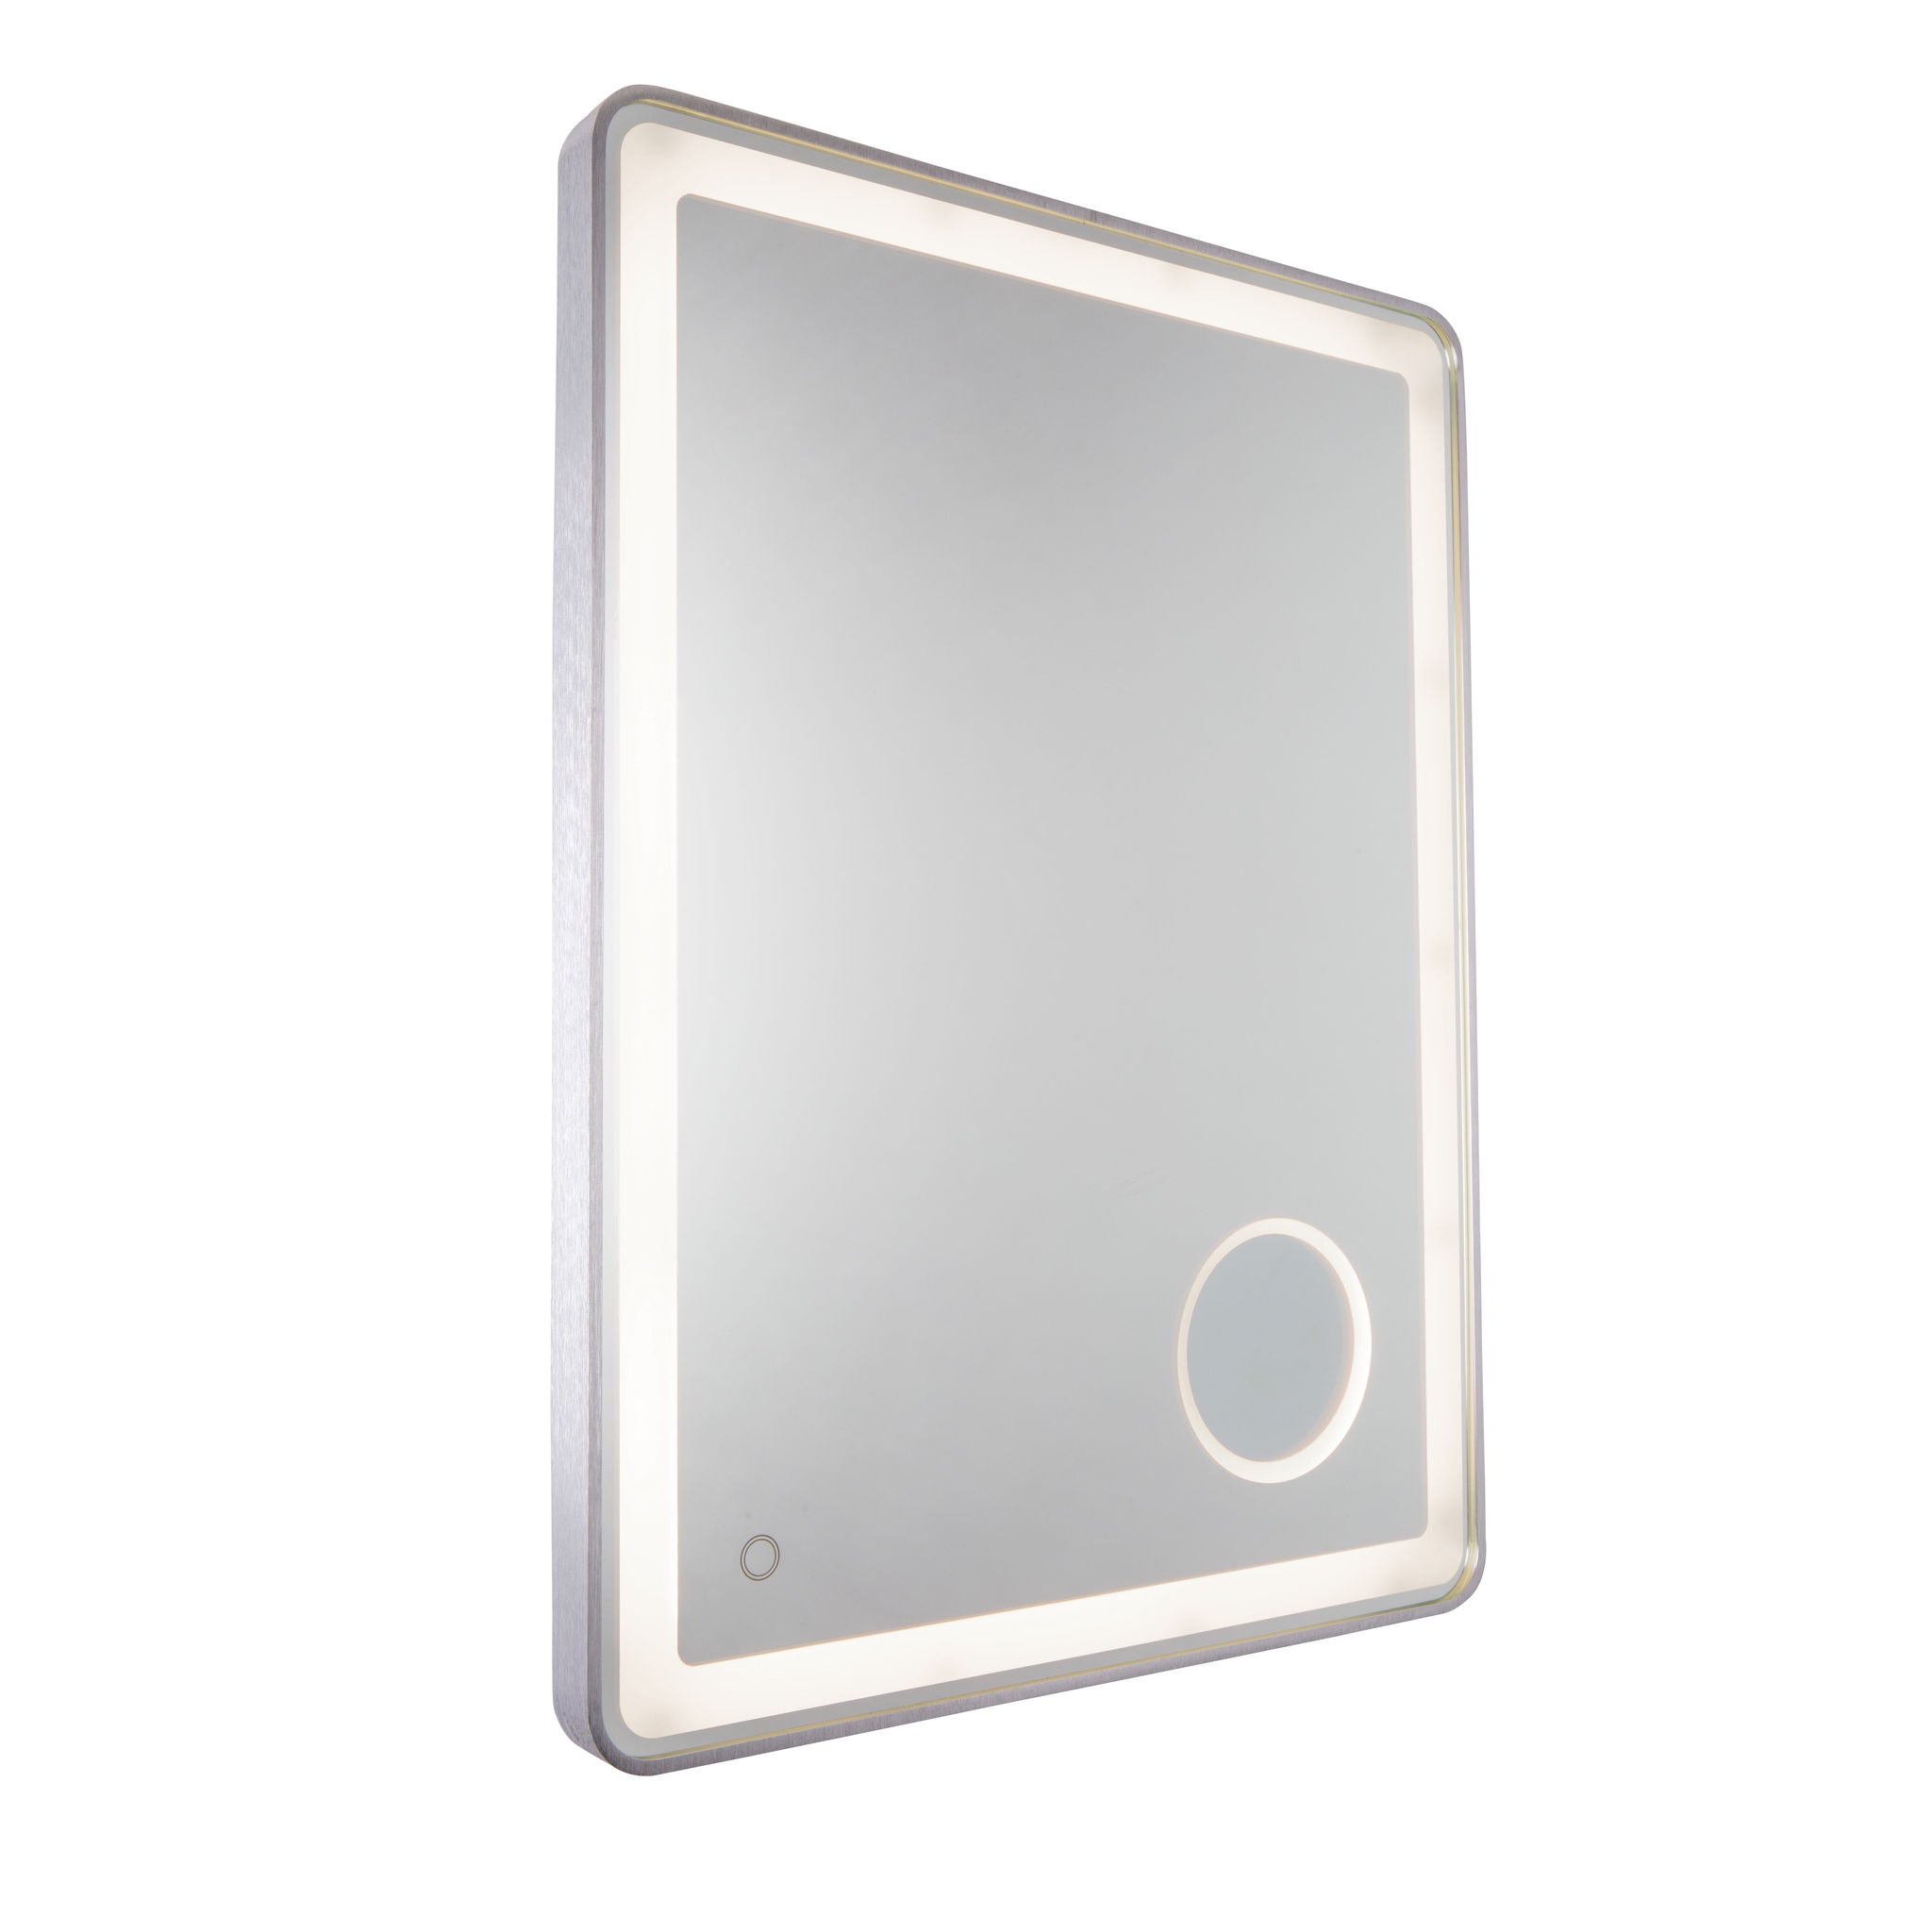 Reflections Mirror INTEGRATED LED - AM317 | ARTCRAFT